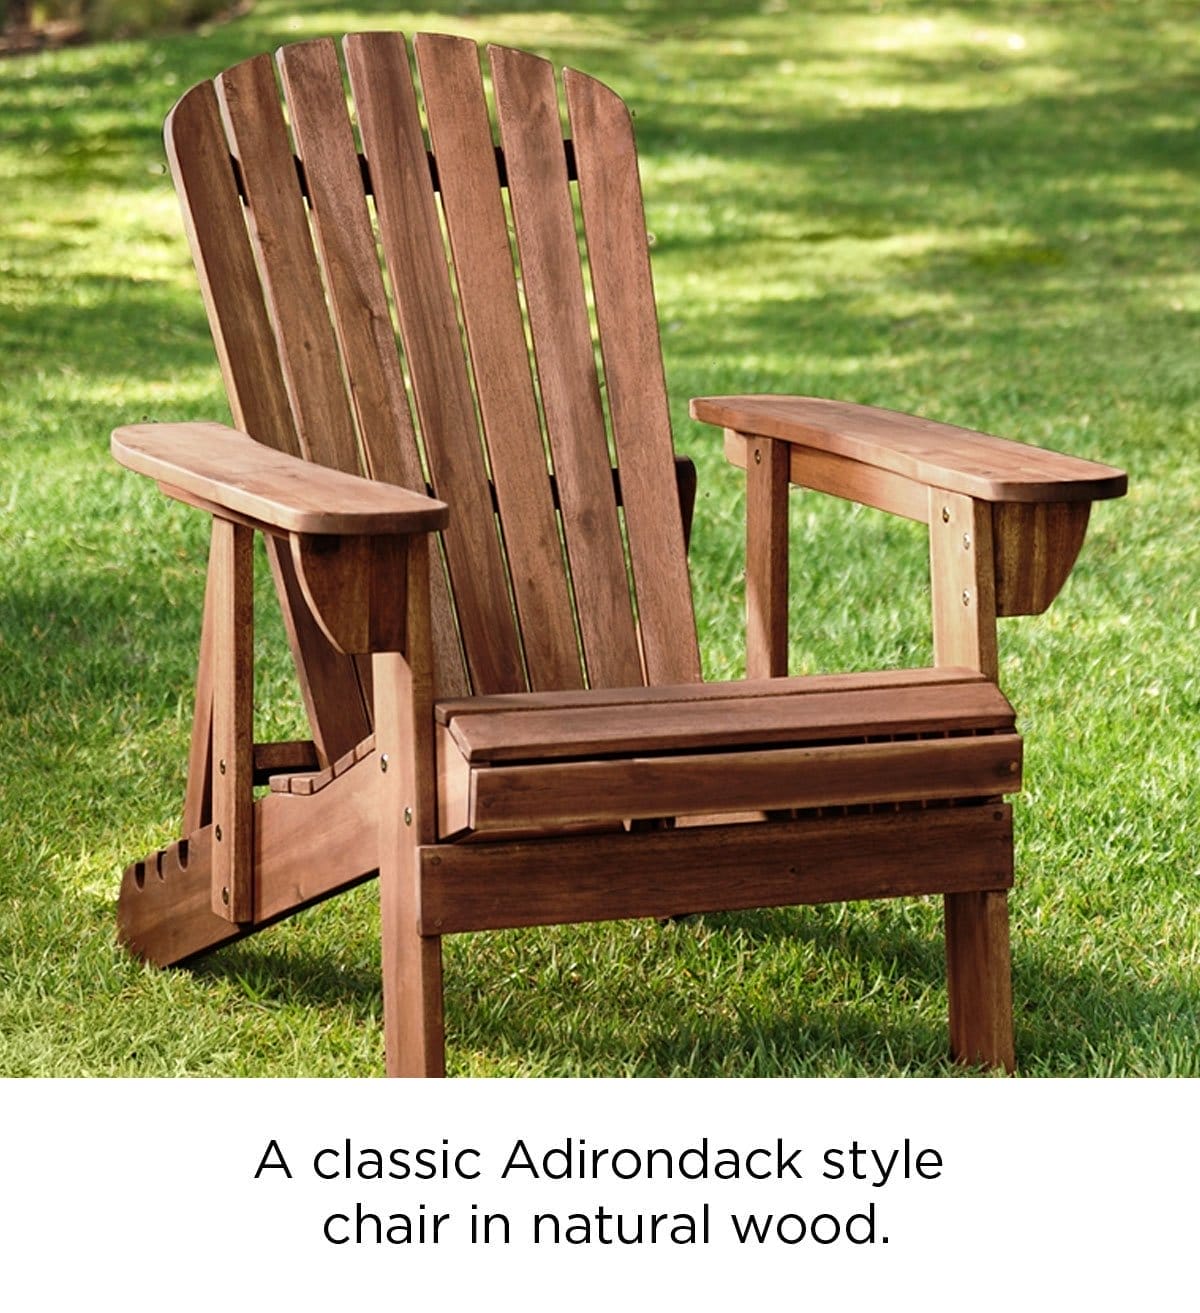 A classic Adirondack style chair in natural wood.